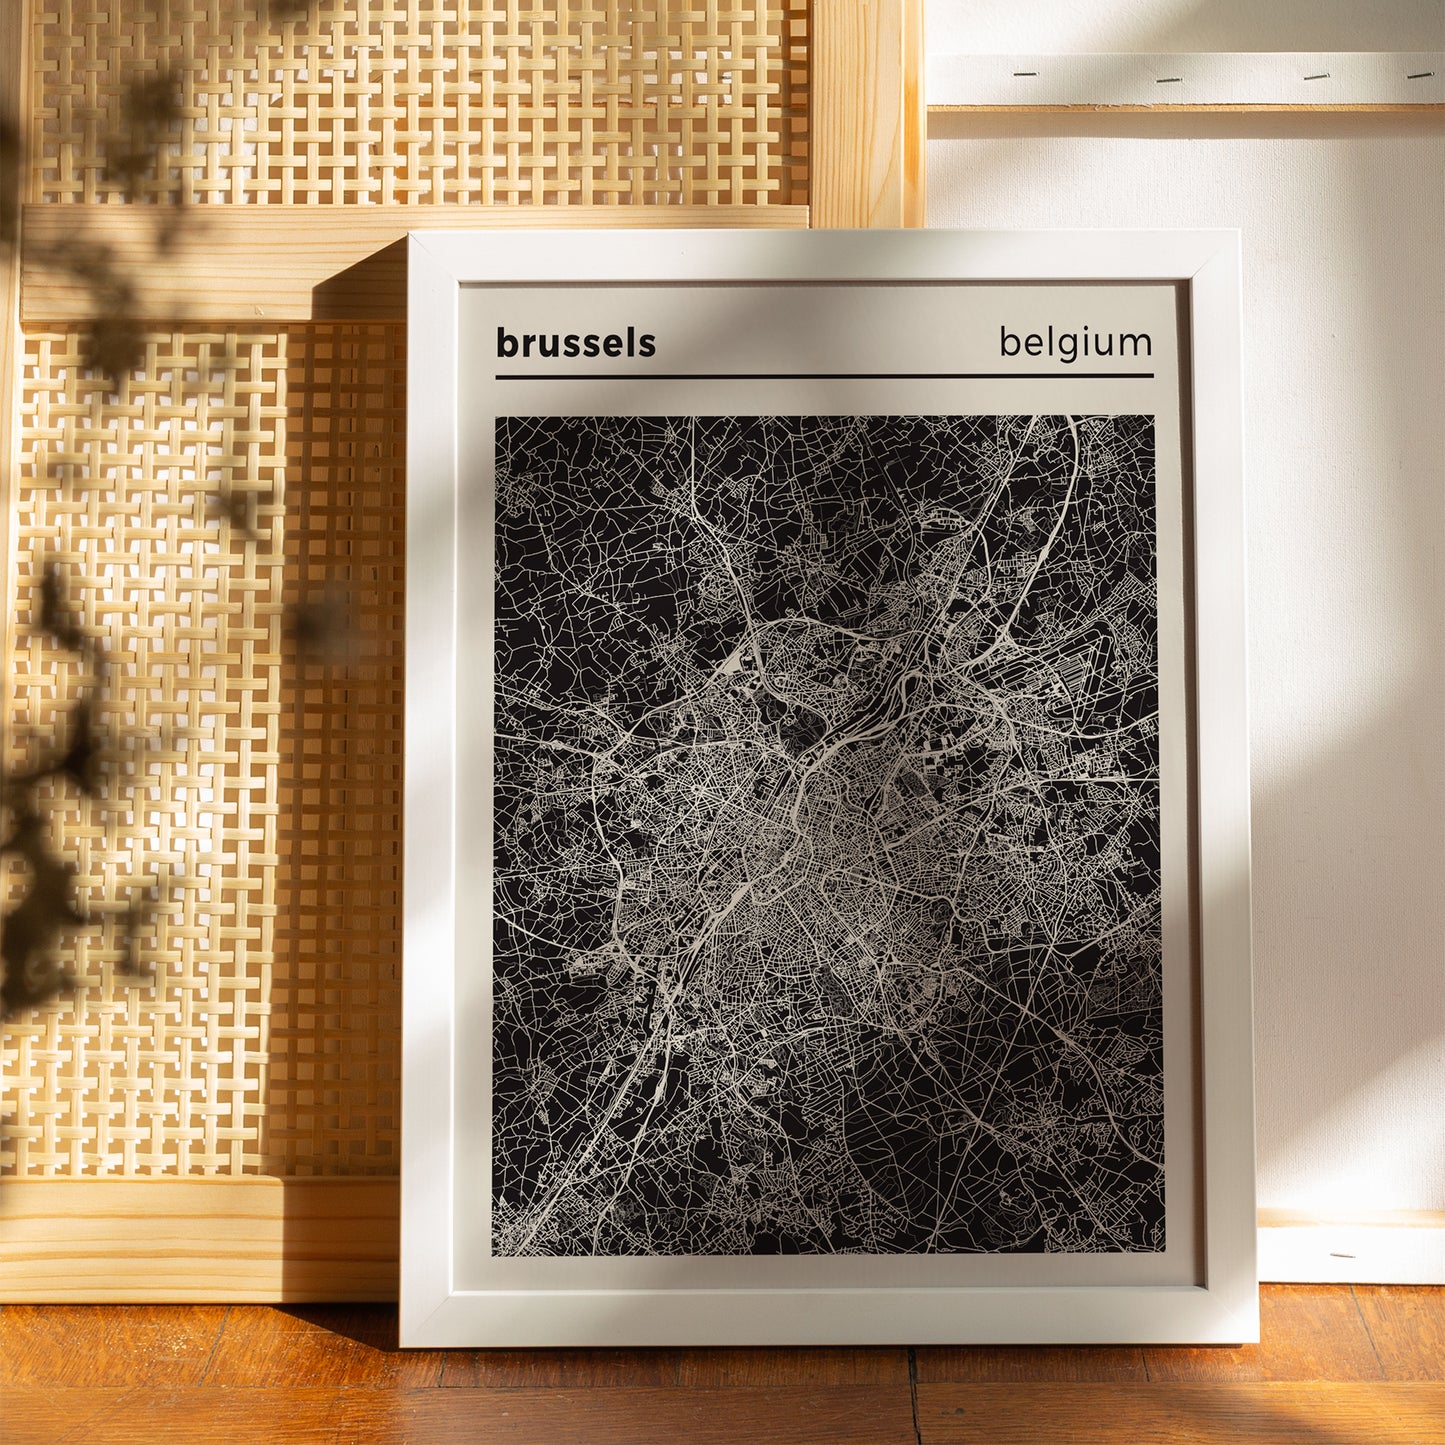 Brussels - Belgium | Black and White City Map